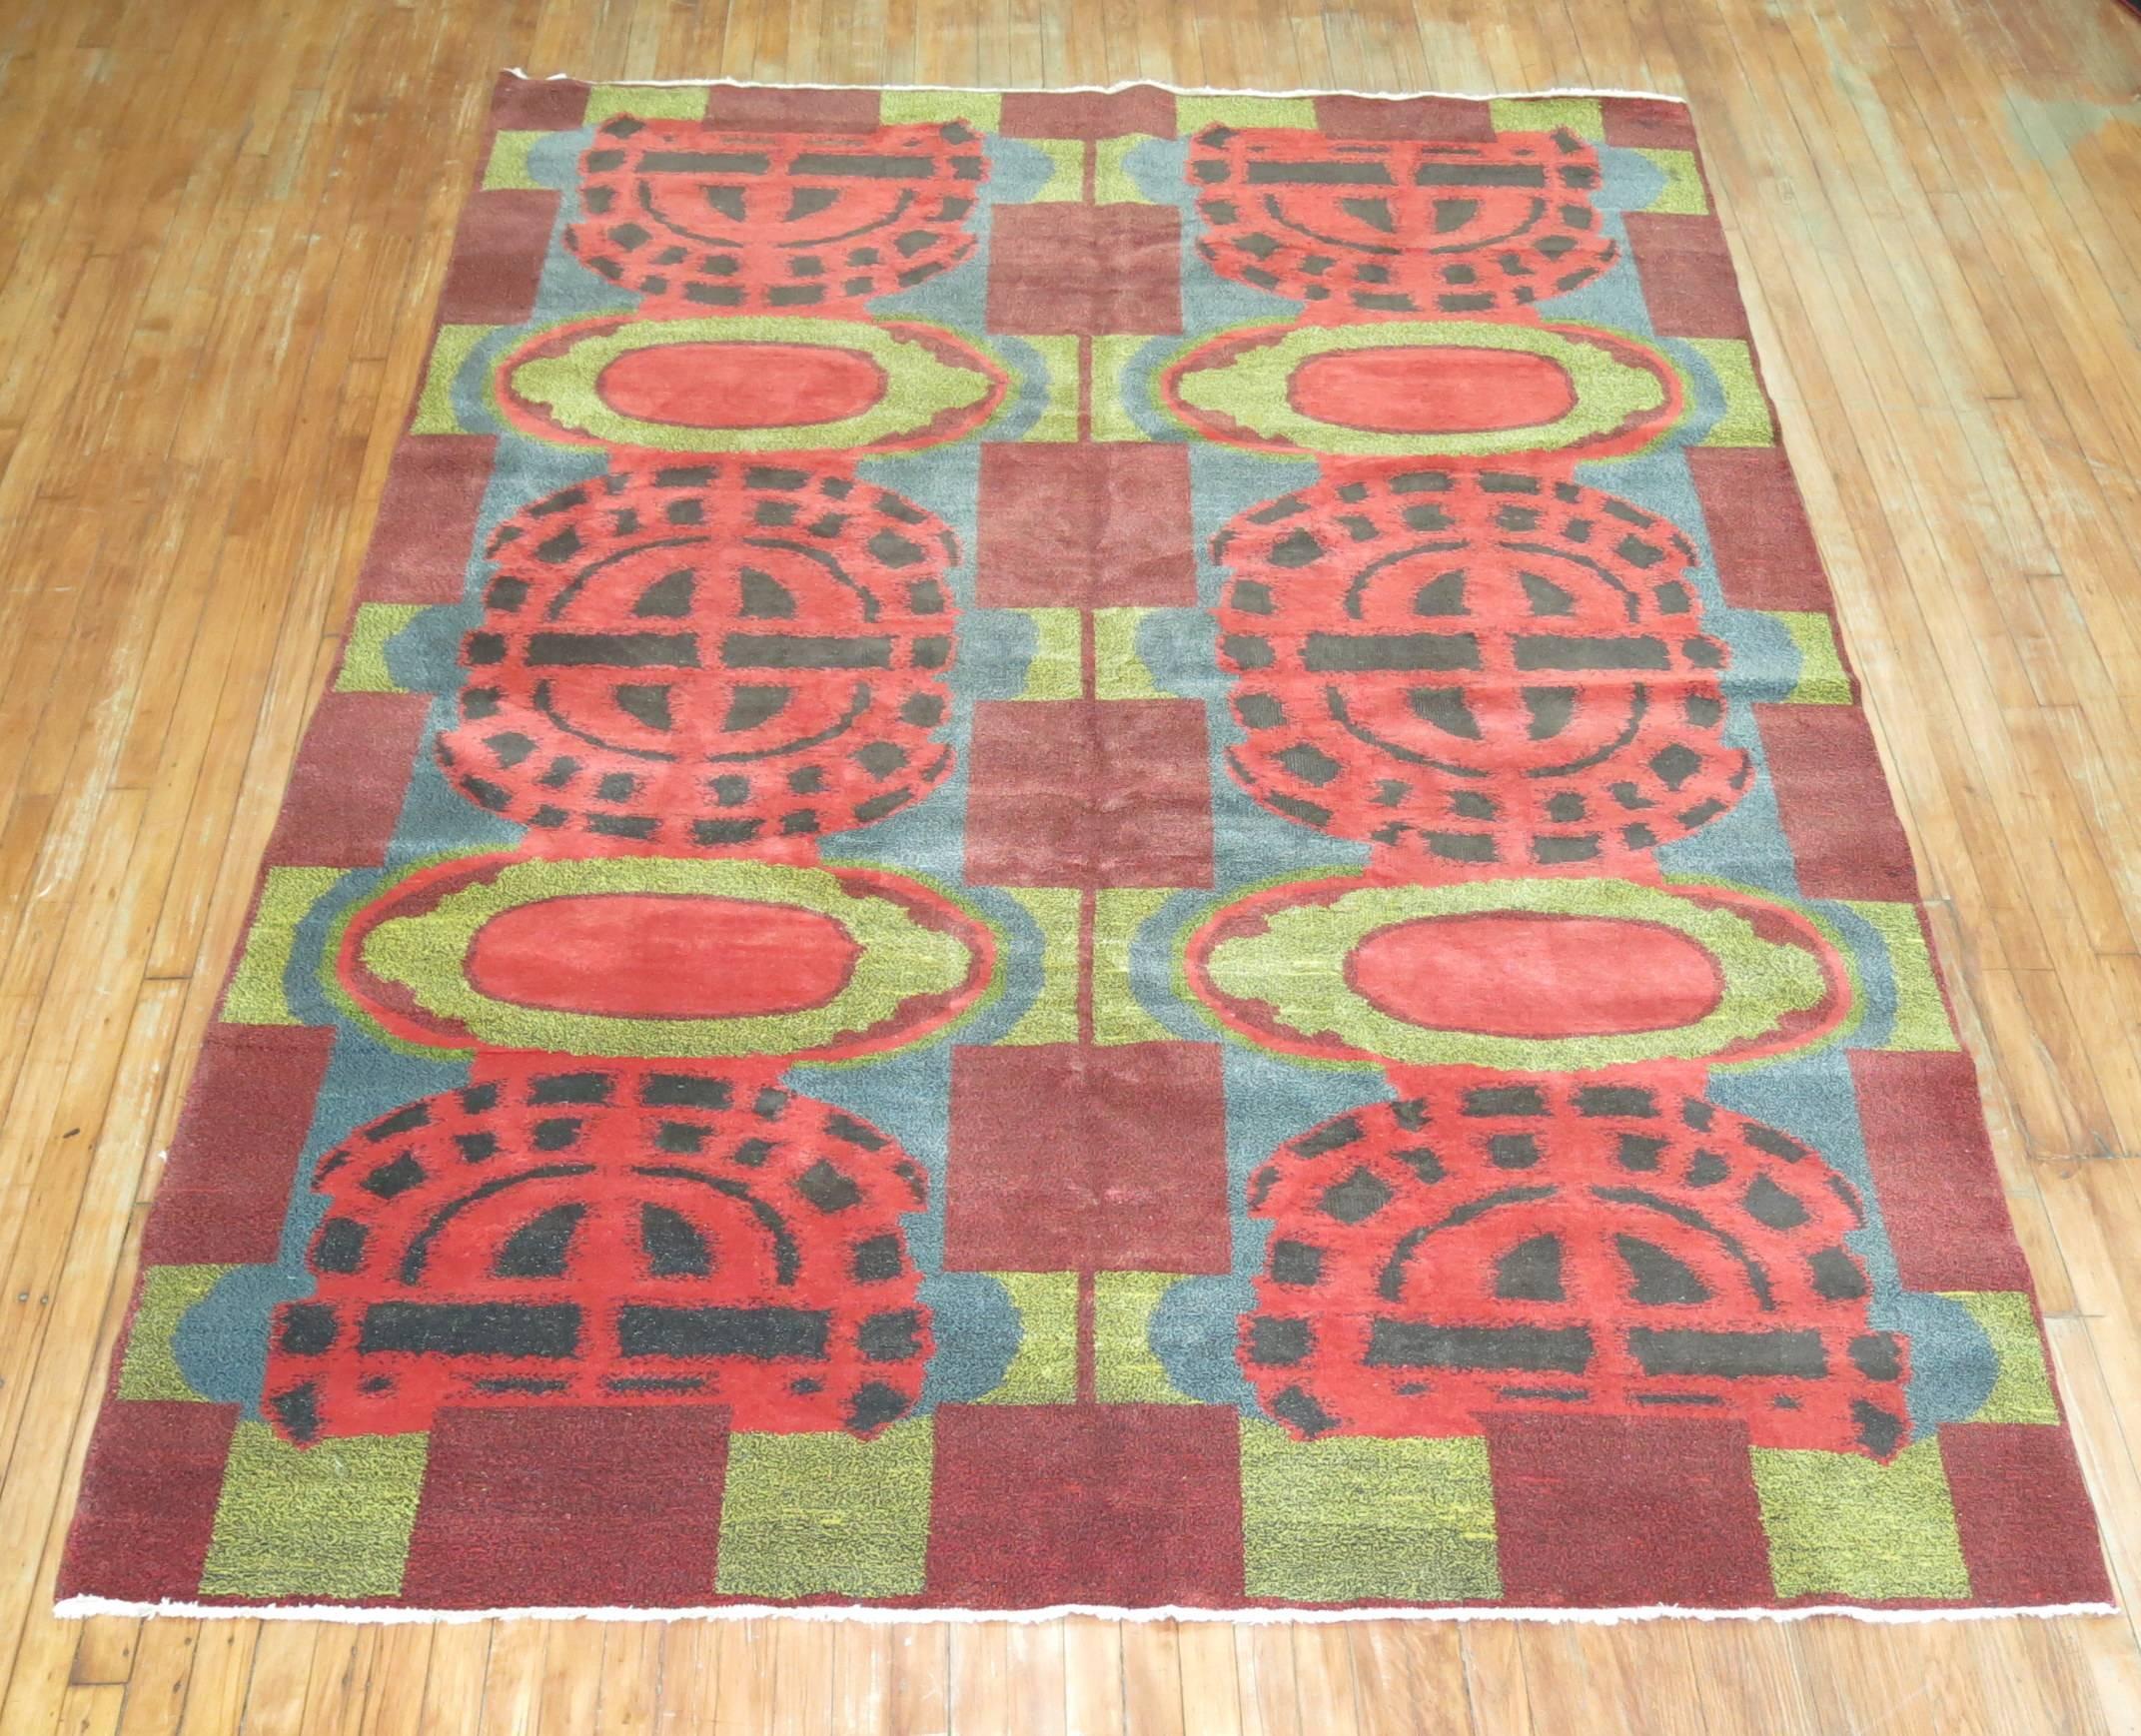 A dazzling european modernist carpet with intense colors and abstract design.